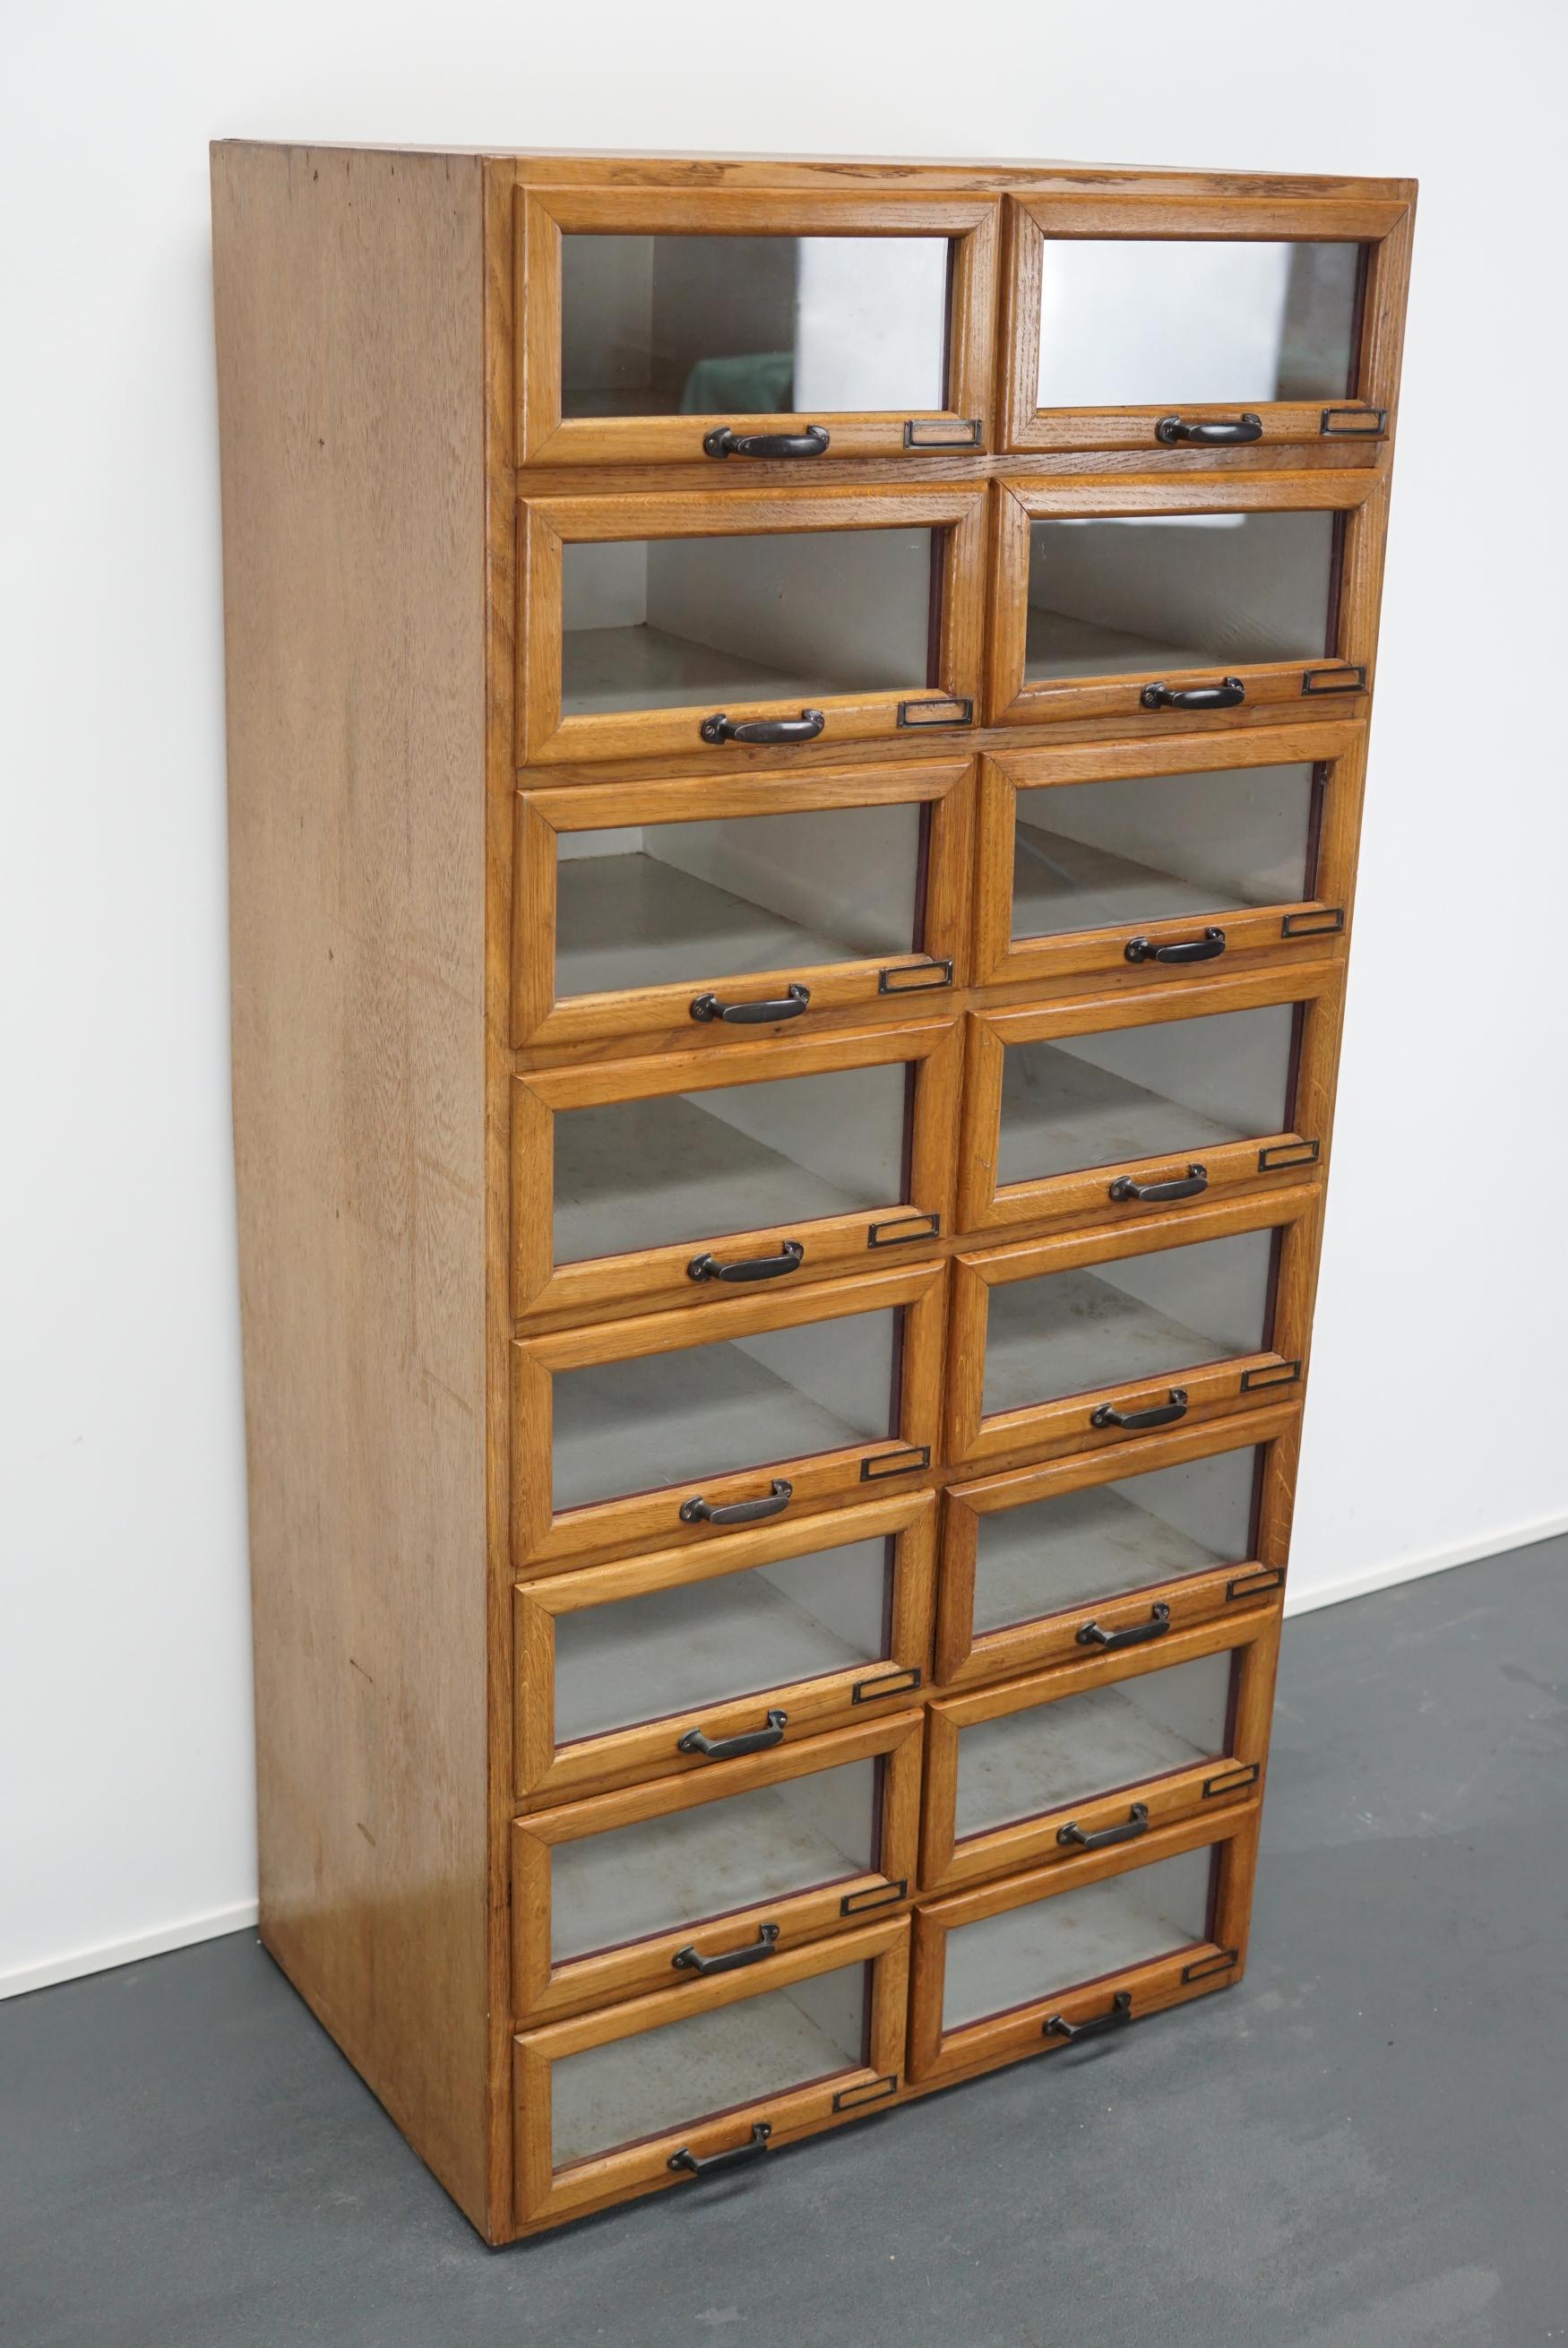 This vintage haberdashery shop cabinet originates from the Netherlands. The piece is made from oak and features 16 drawers which measure 42 x 30 x 14 cm on the inside.